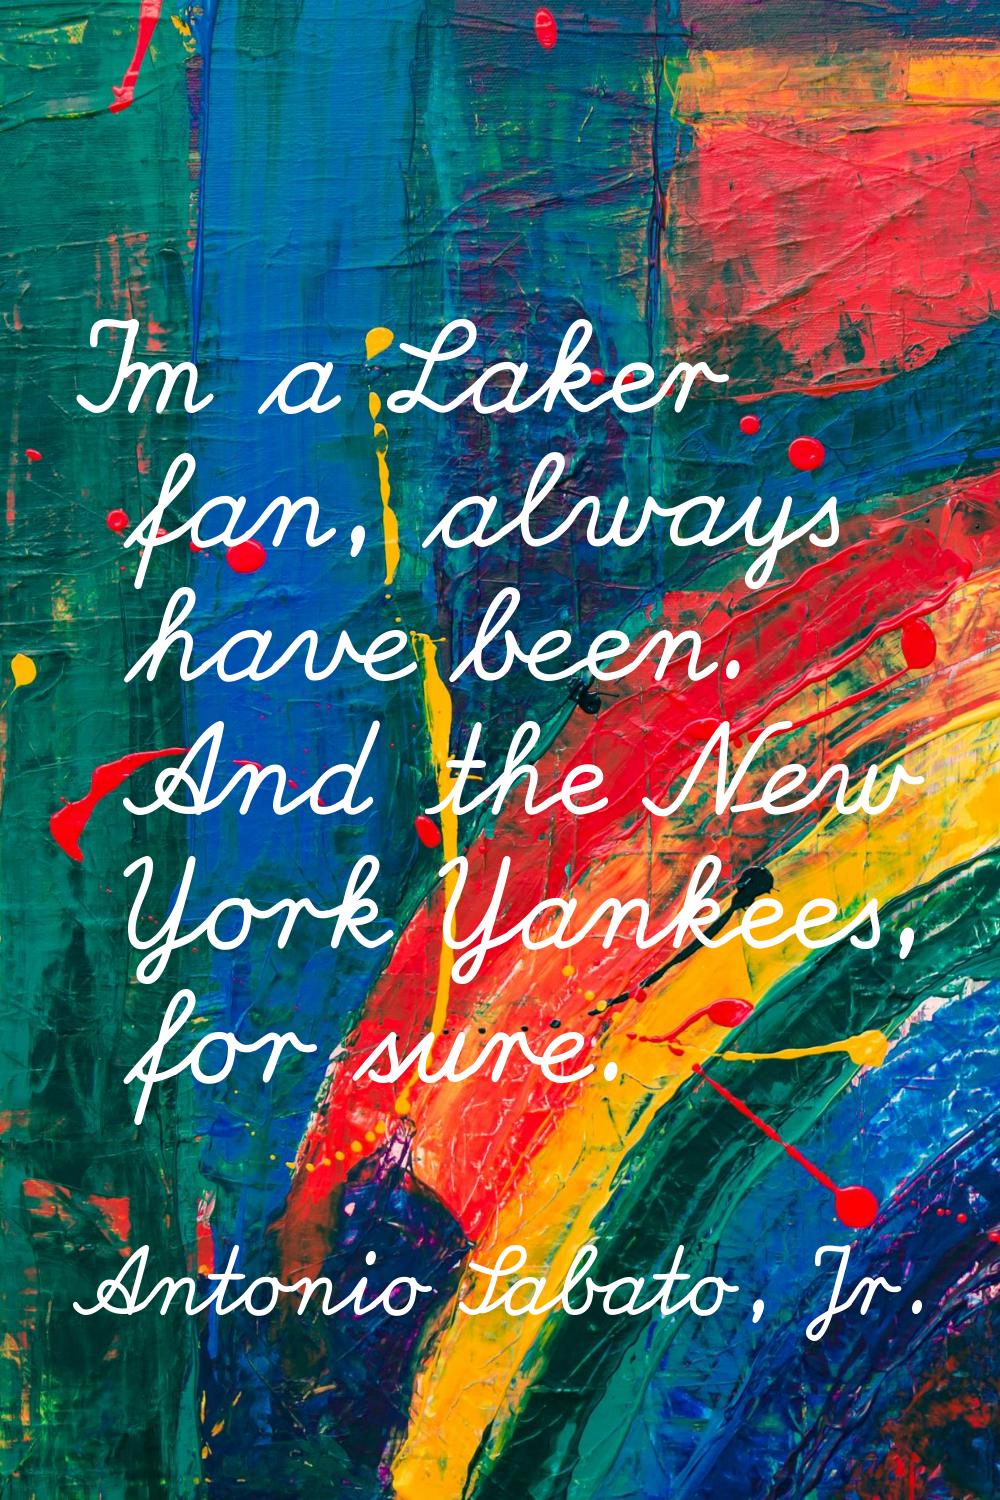 I'm a Laker fan, always have been. And the New York Yankees, for sure.